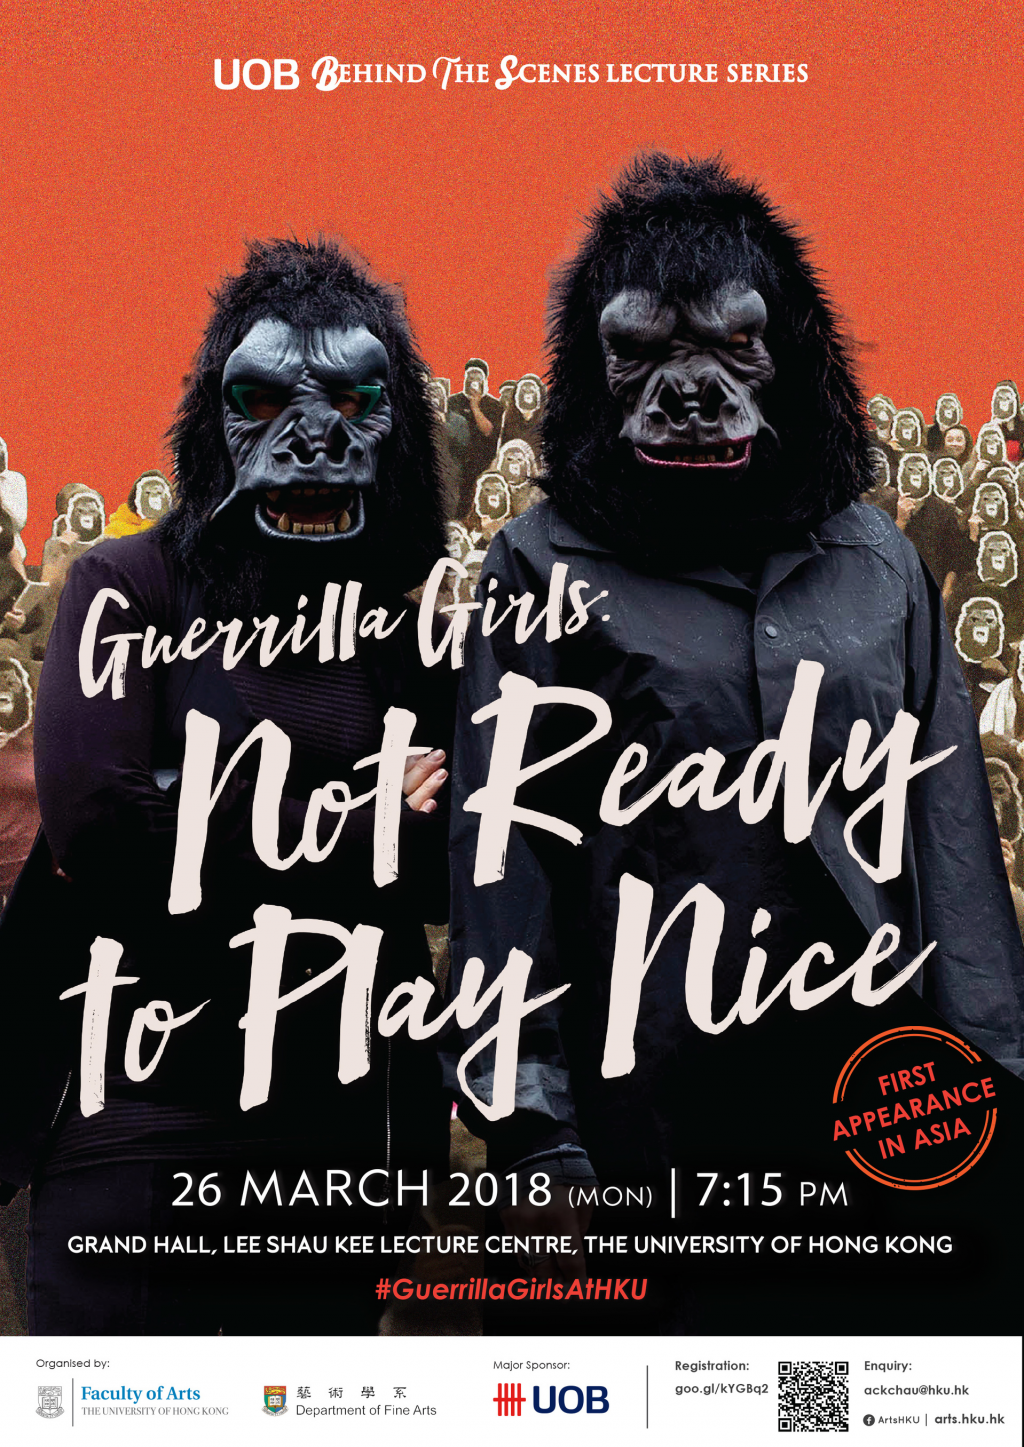 [UOB Behind the Scenes Lecture Series] Guerrilla Girls: Not Ready to Play Nice